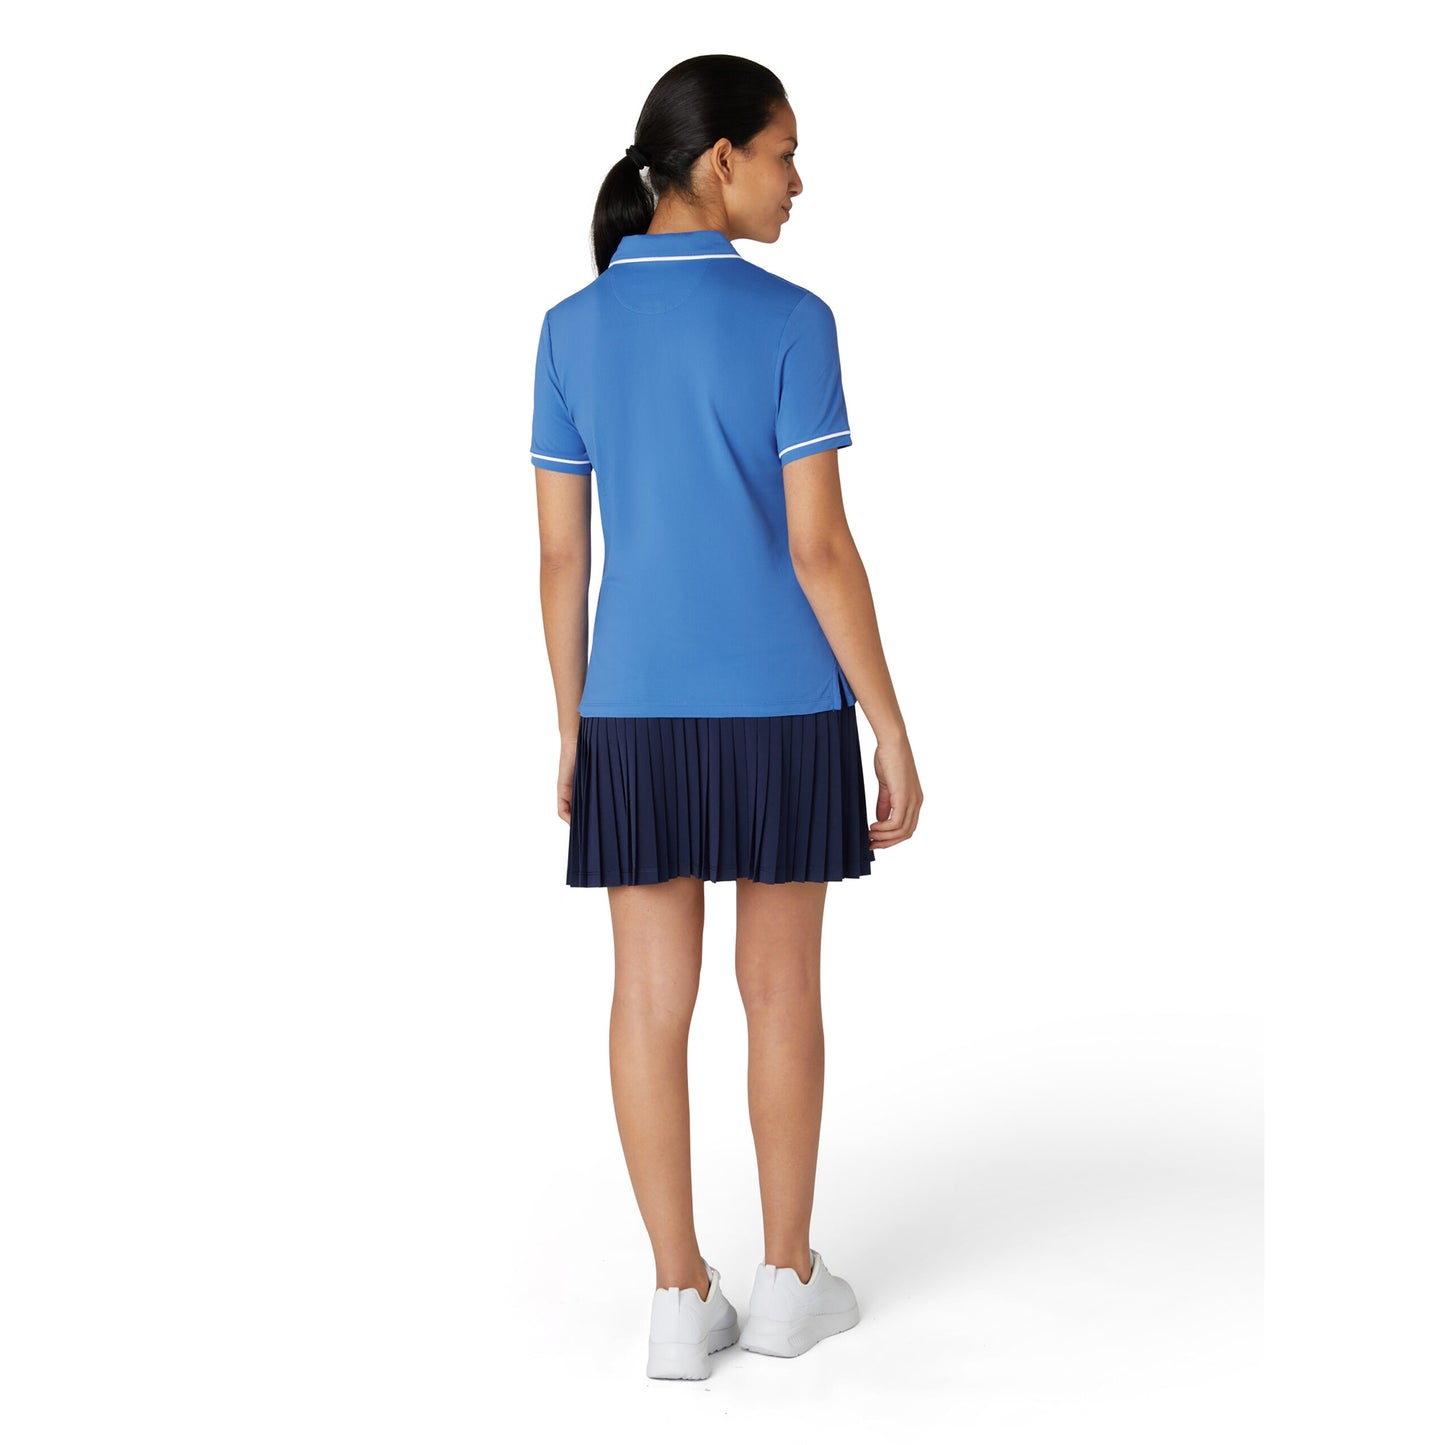 Original Penguin Ladies Short Sleeve Polo with Contrast Piping in Nebulas Blue